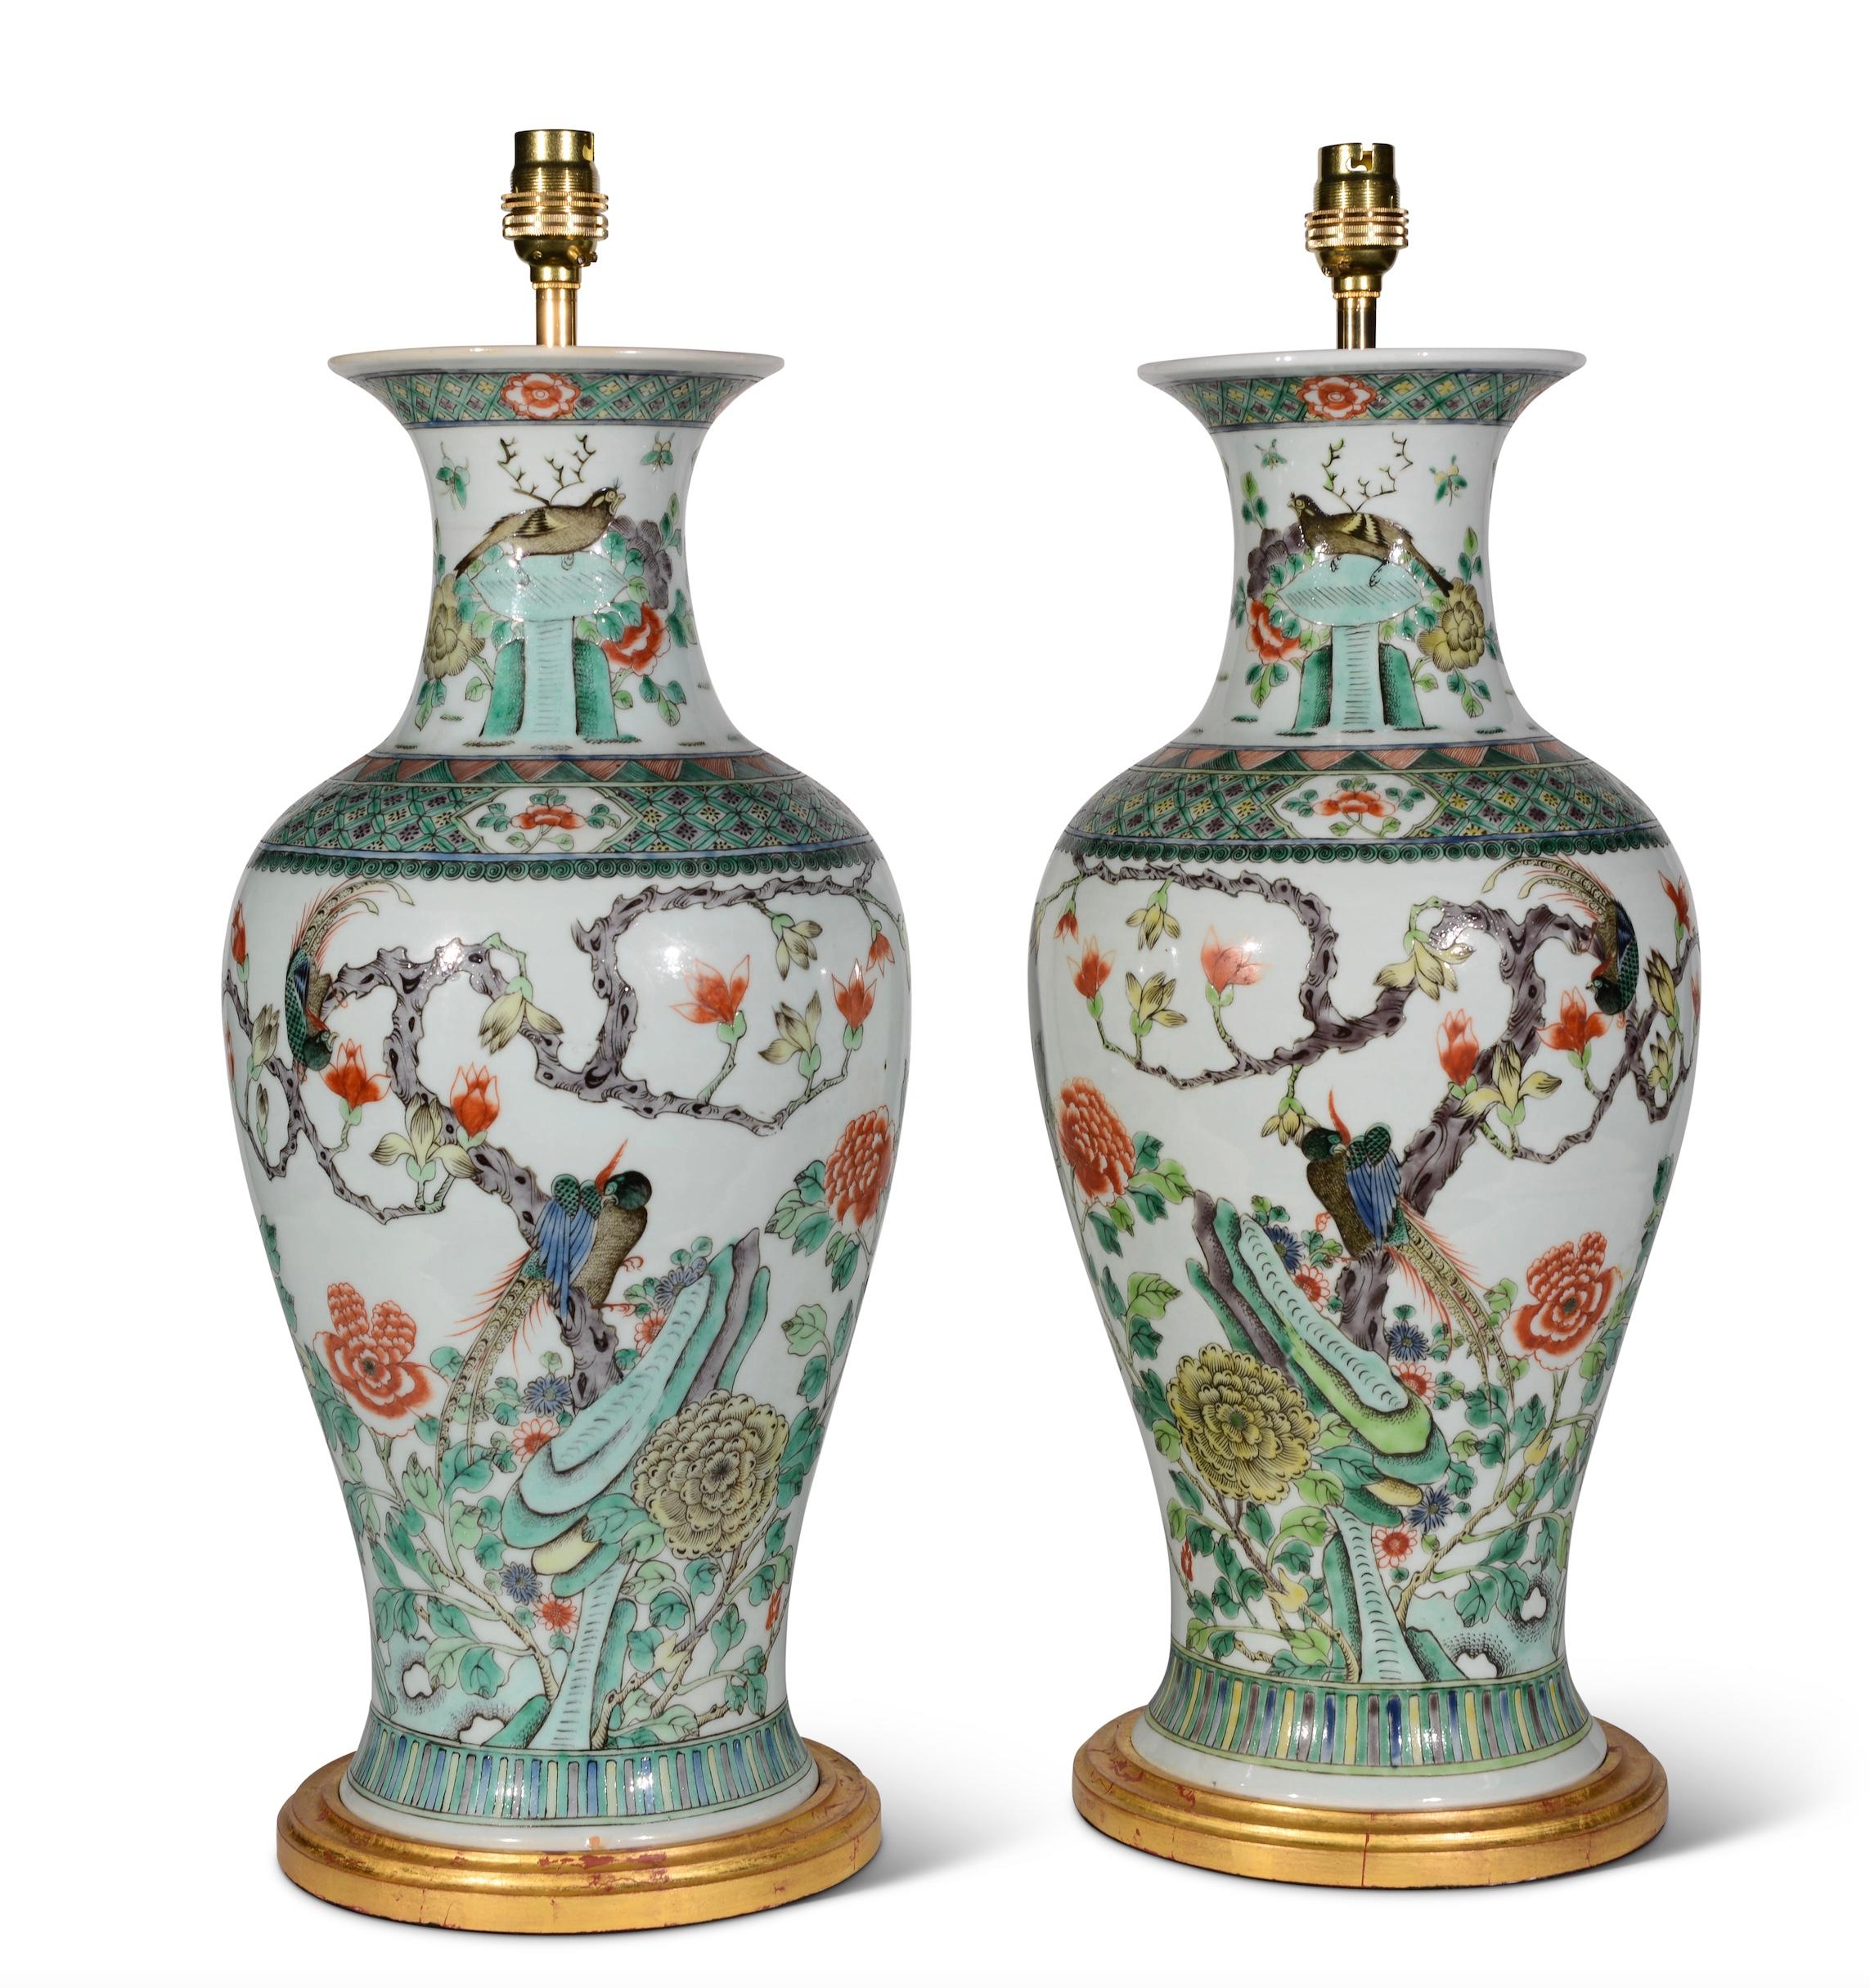 A fine pair of late 19th century Chinese famille verte baluster vases, decorated with exotic birds amongst trees and foliage and rocky outcrops with furthers stylised foliate detailing, predominantly in tones of green on a white background, now